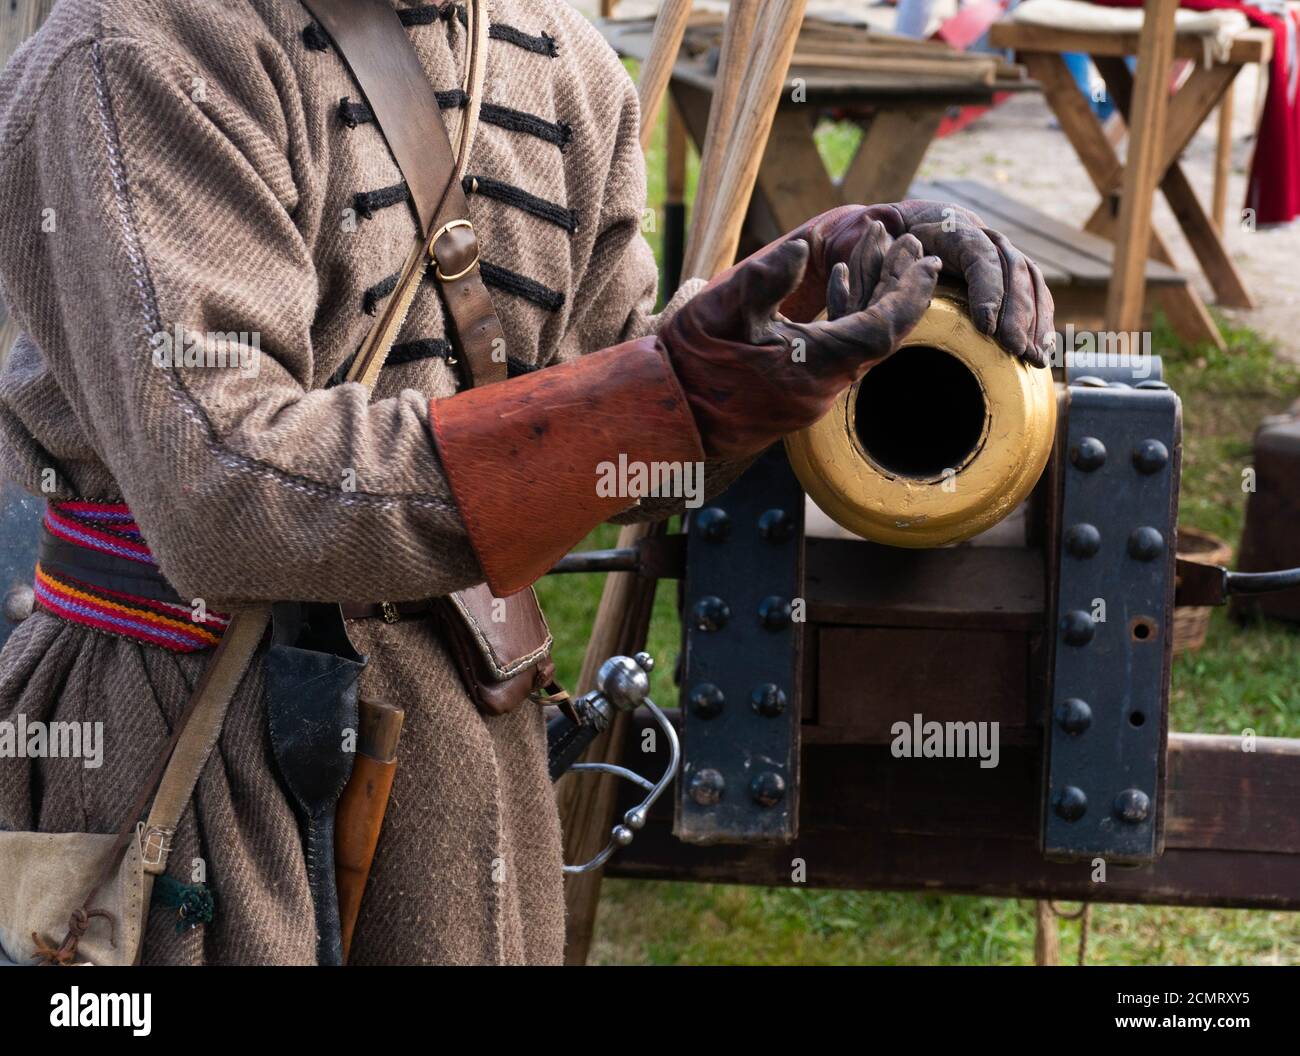 Ancient gun and hands in leather gloves Stock Photo